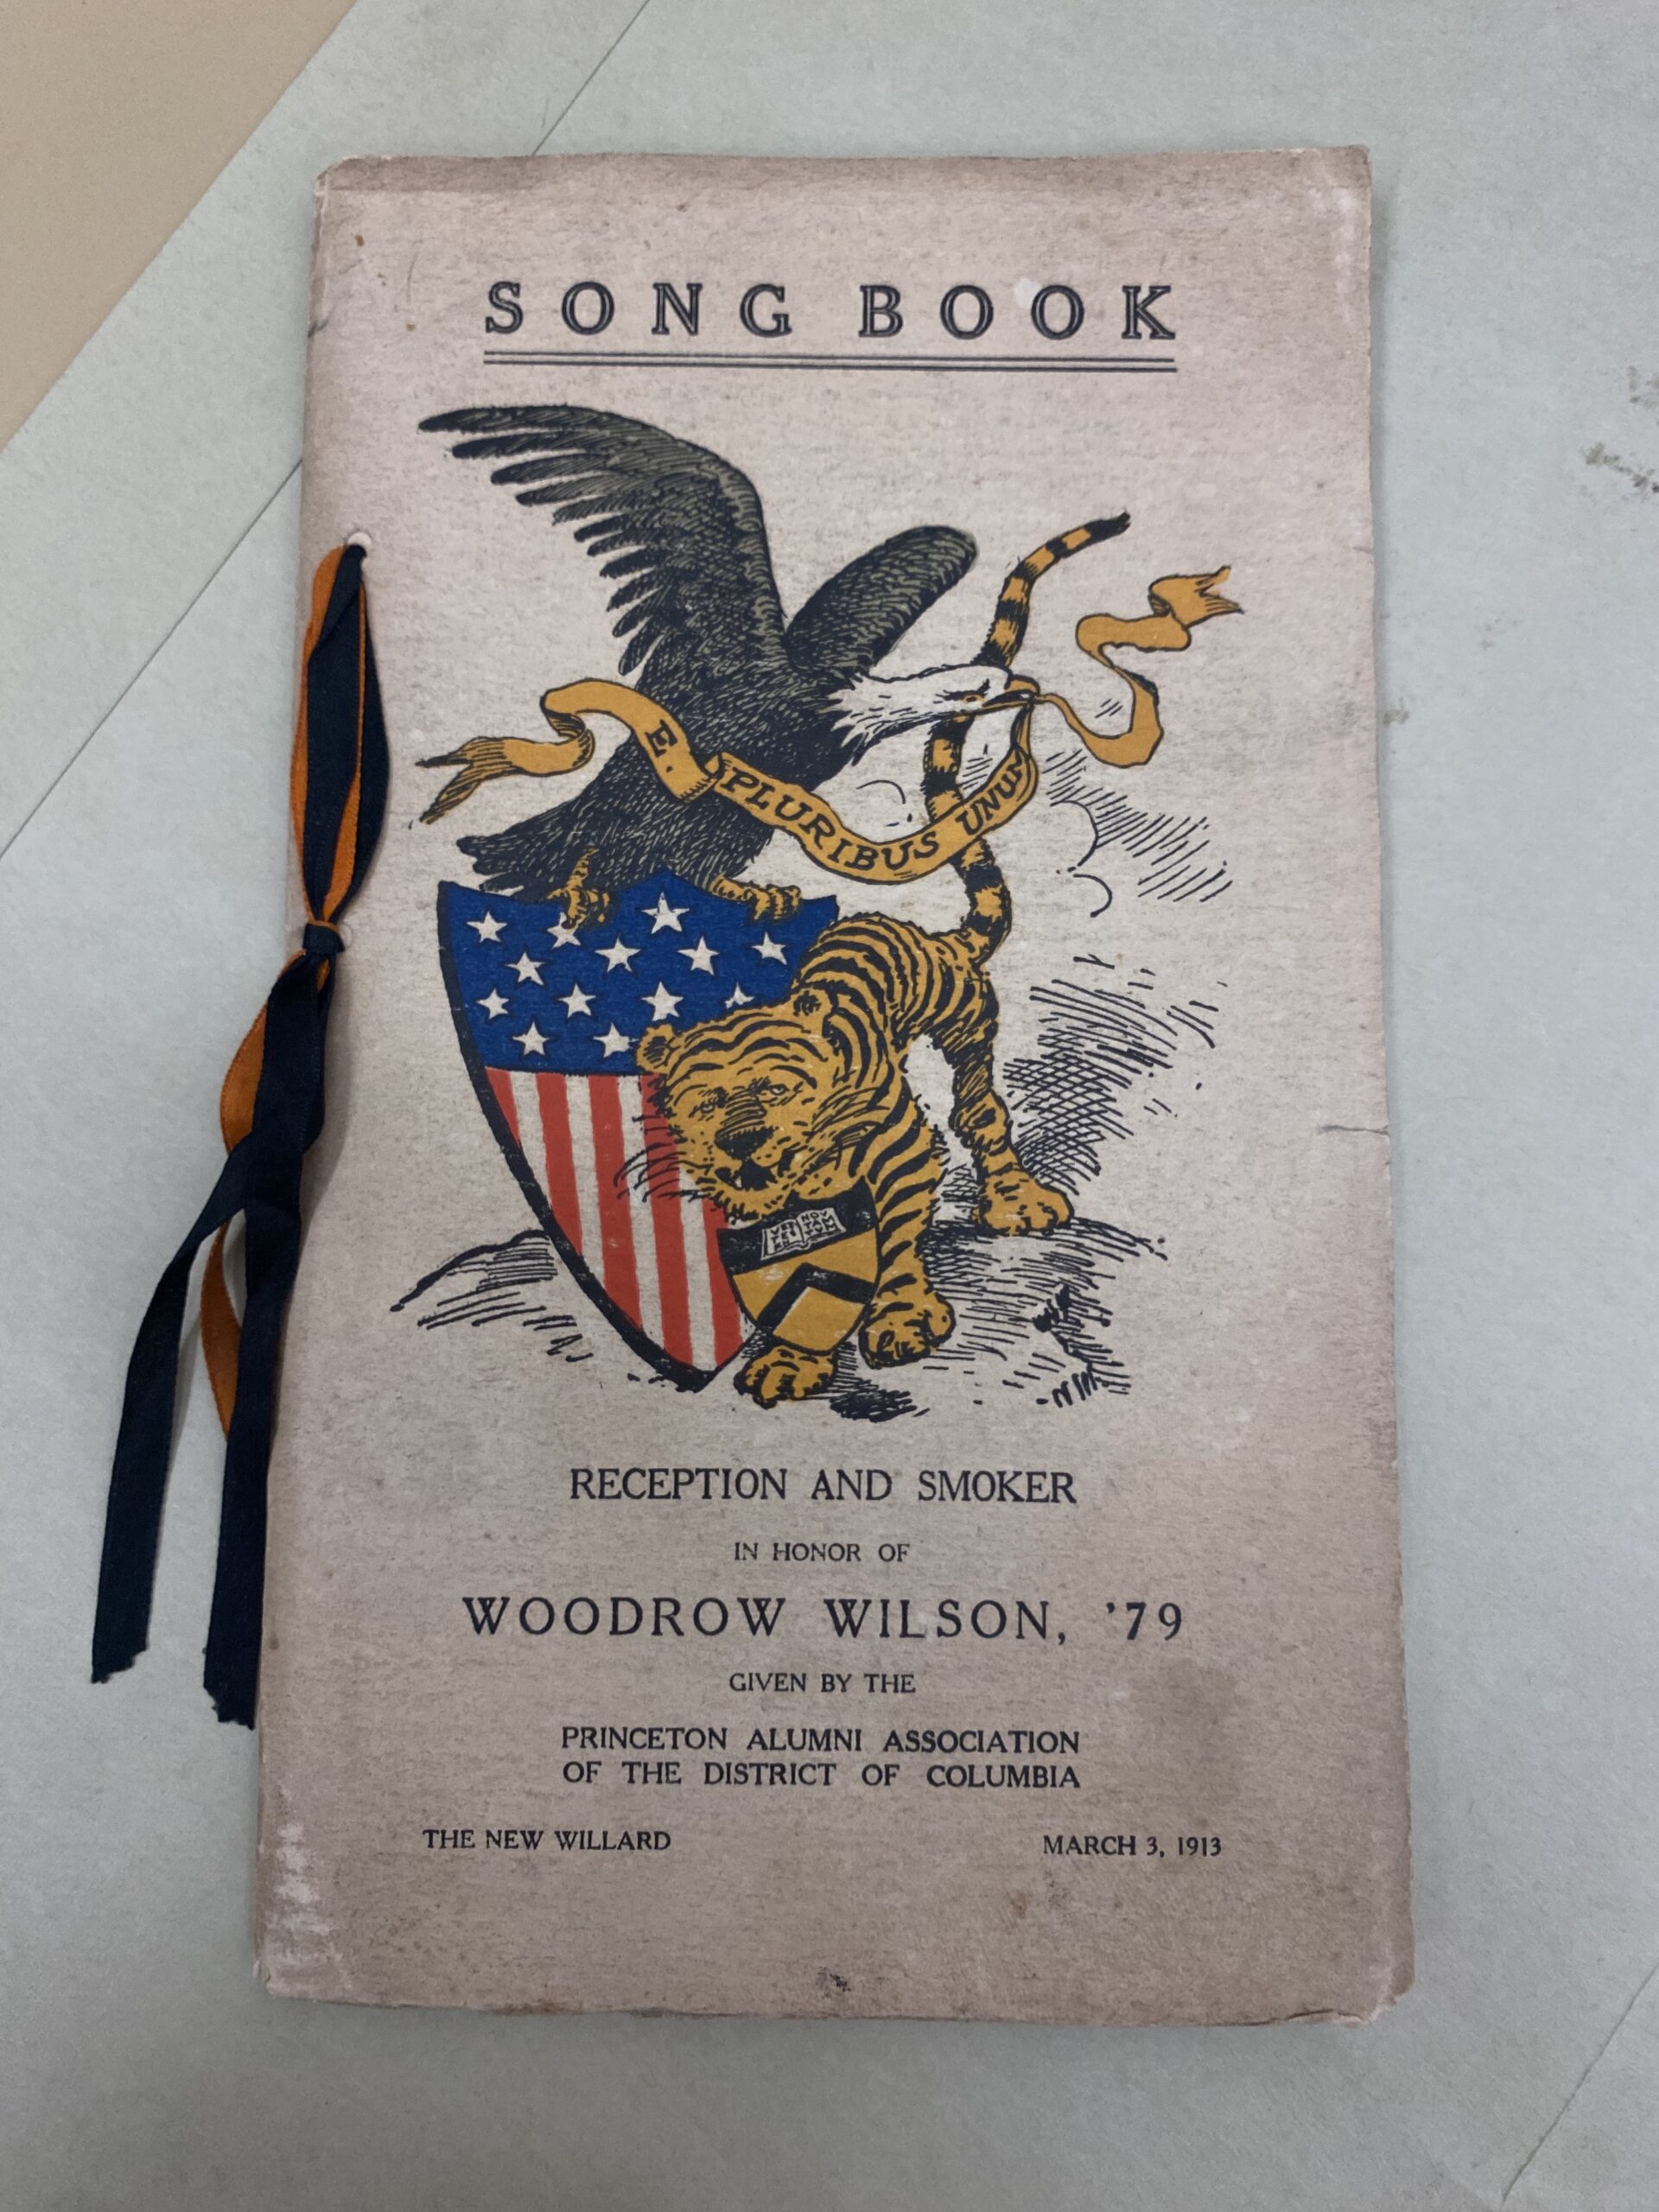 A song book held together with a ribbon, has a bird, lion, and US flag shield color illustration on the cover.